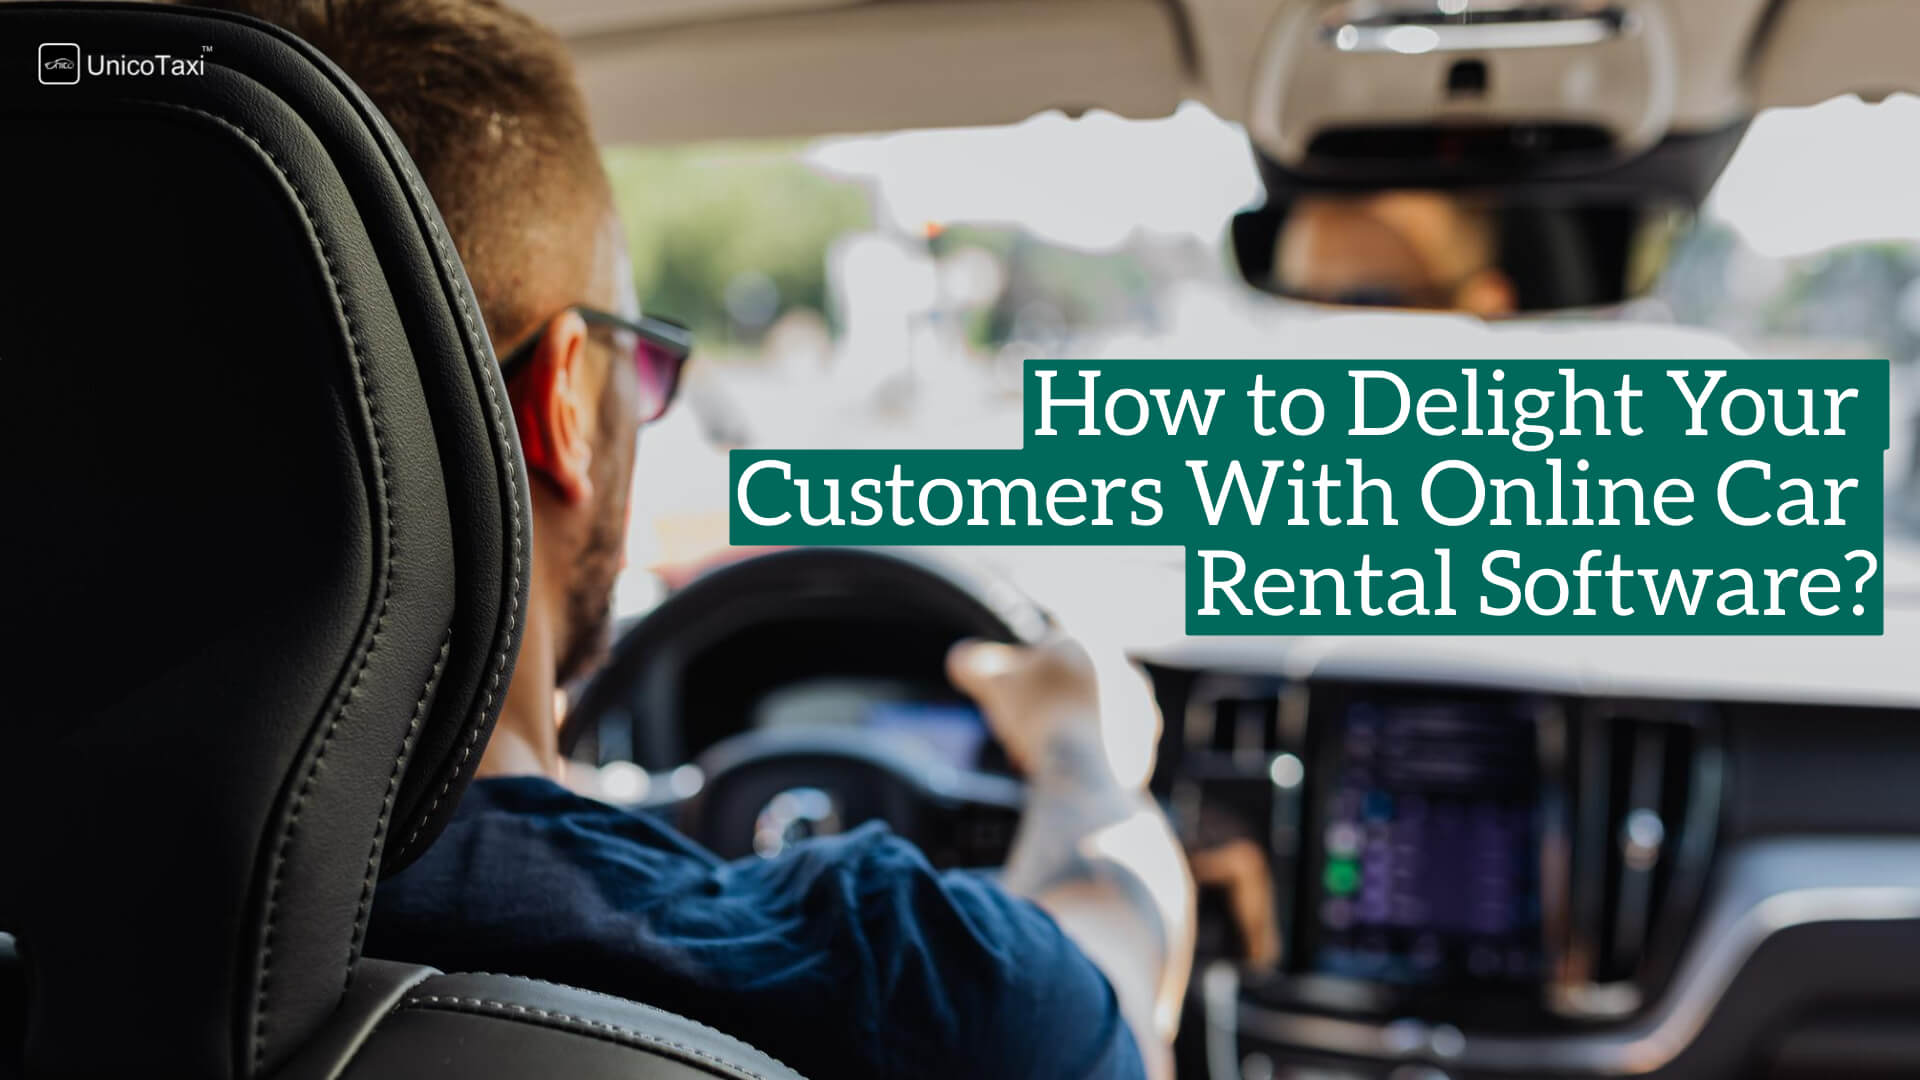 How to Delight Your Customers With Online Car Rental Software?